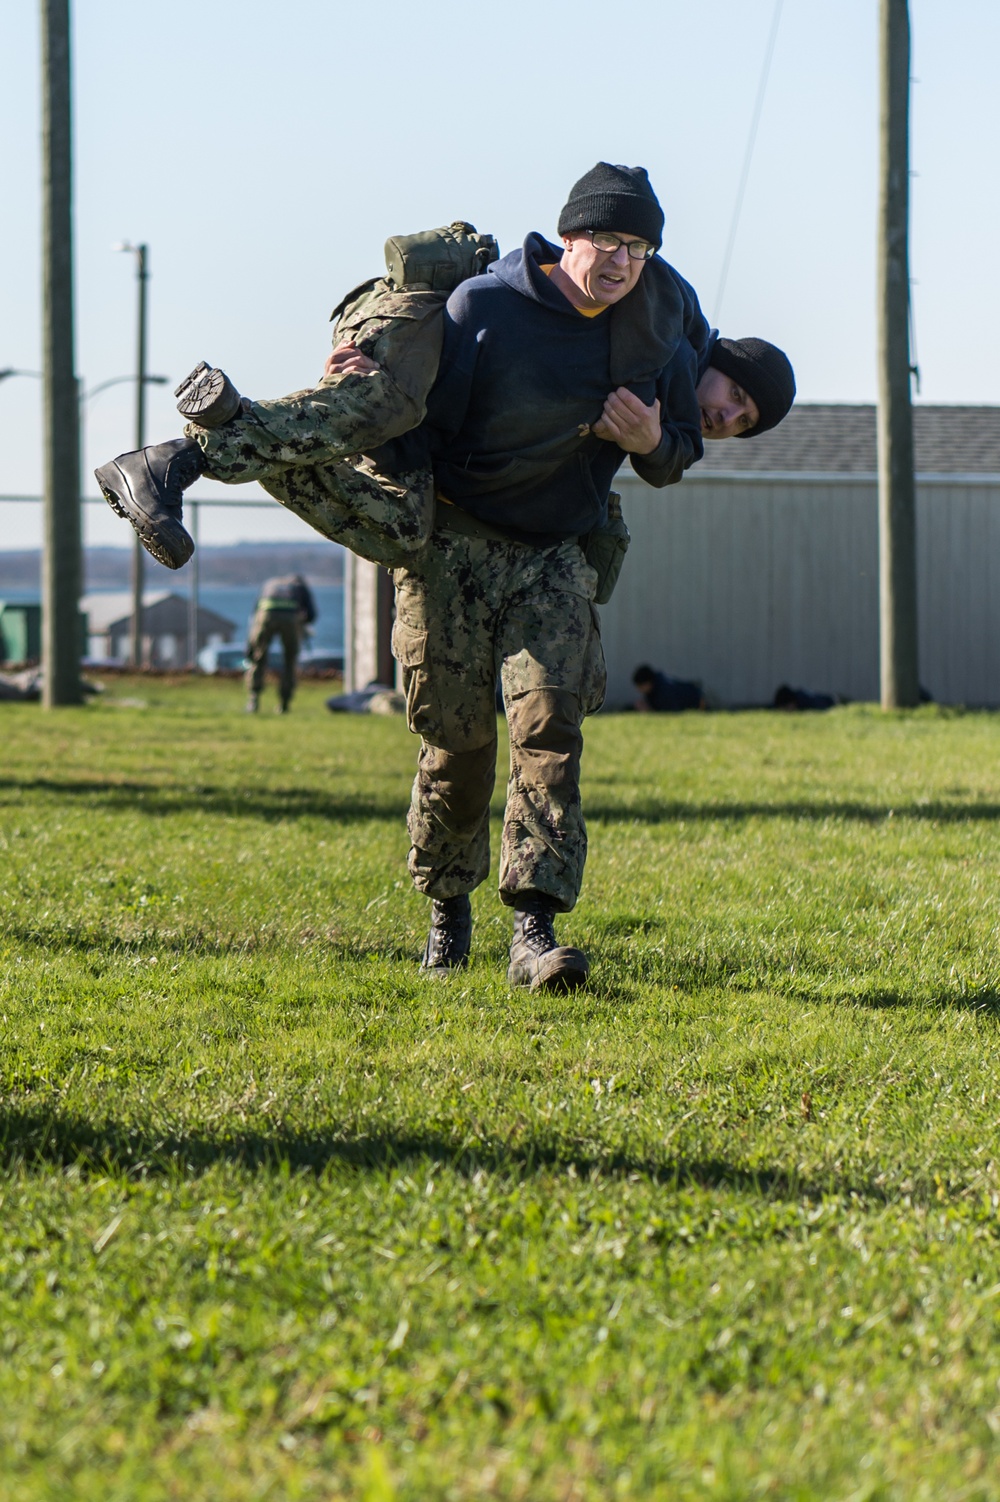 191106-N-TE695-0007 NEWPORT, R.I. (Nov. 6 2019) -- Navy Officer Candidate School conducts battle station drills at the obstacle course